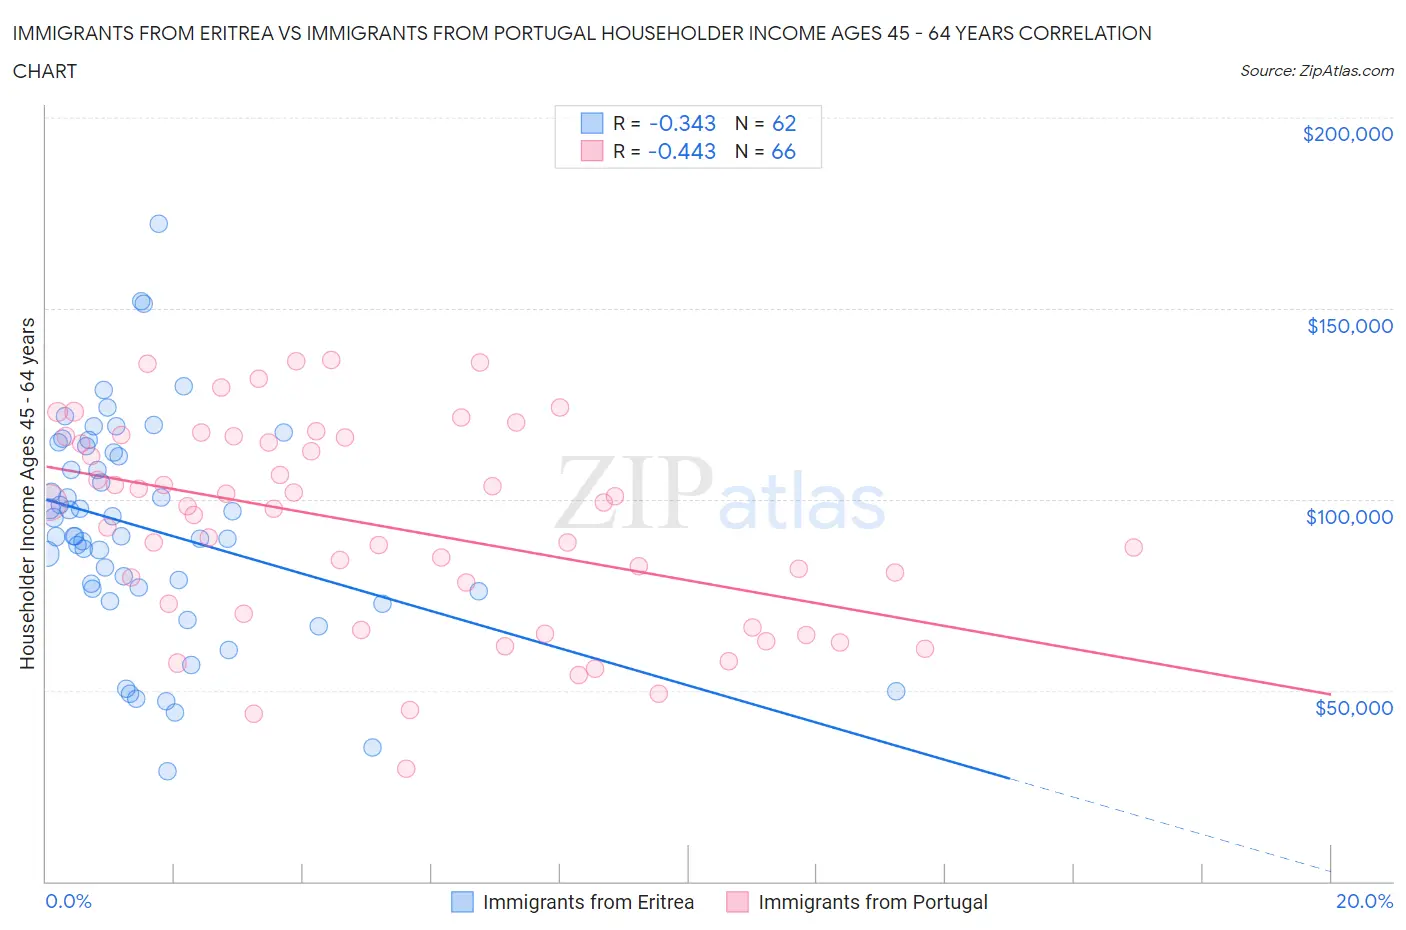 Immigrants from Eritrea vs Immigrants from Portugal Householder Income Ages 45 - 64 years